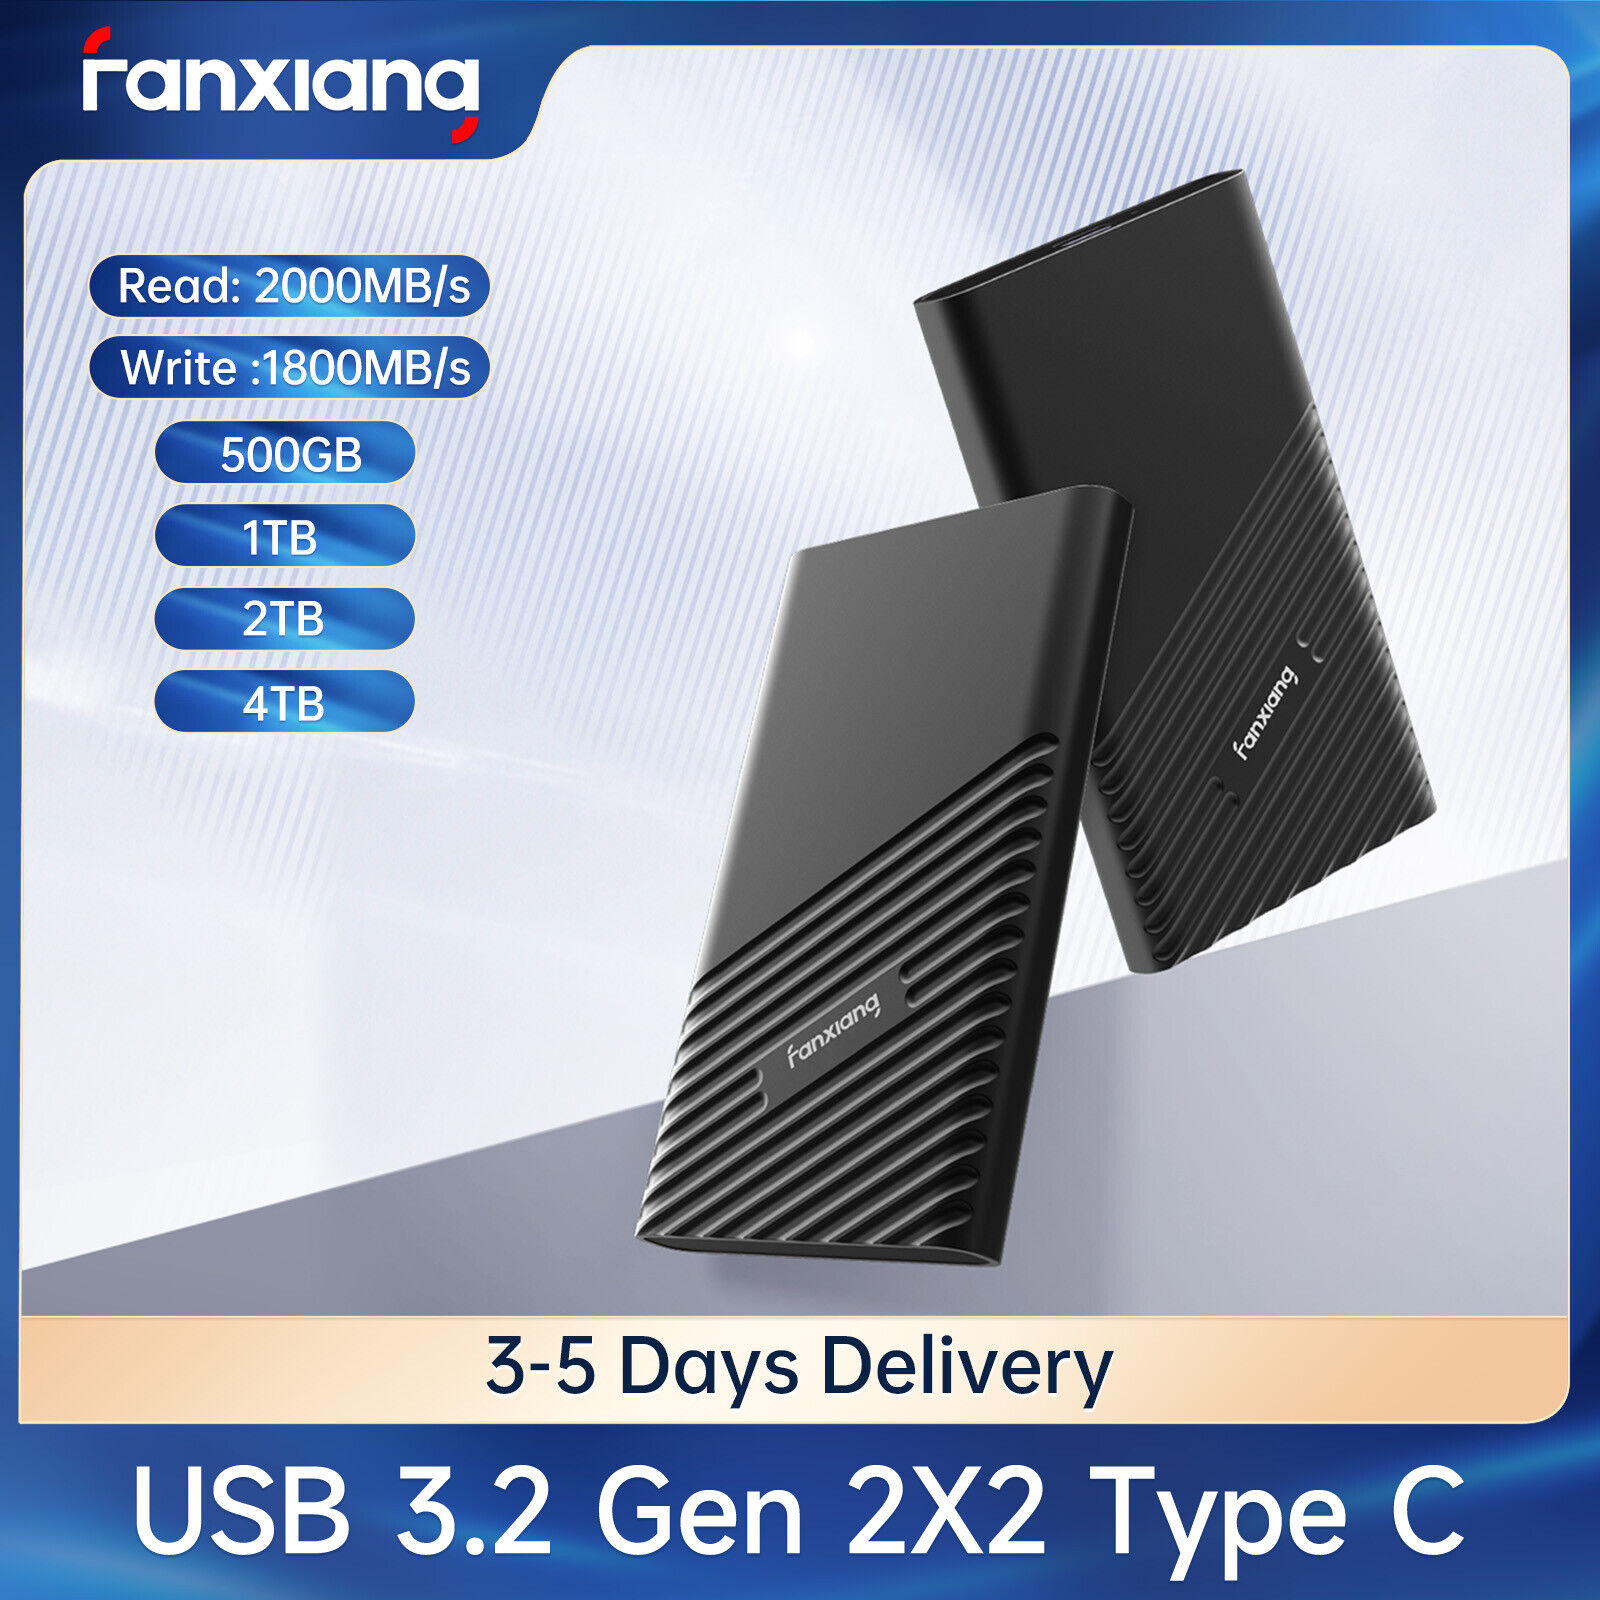 Fanxiang 1TB 512GB External SSD 2TB 2050MB/s USB 3.2 Portable Solid State Drive